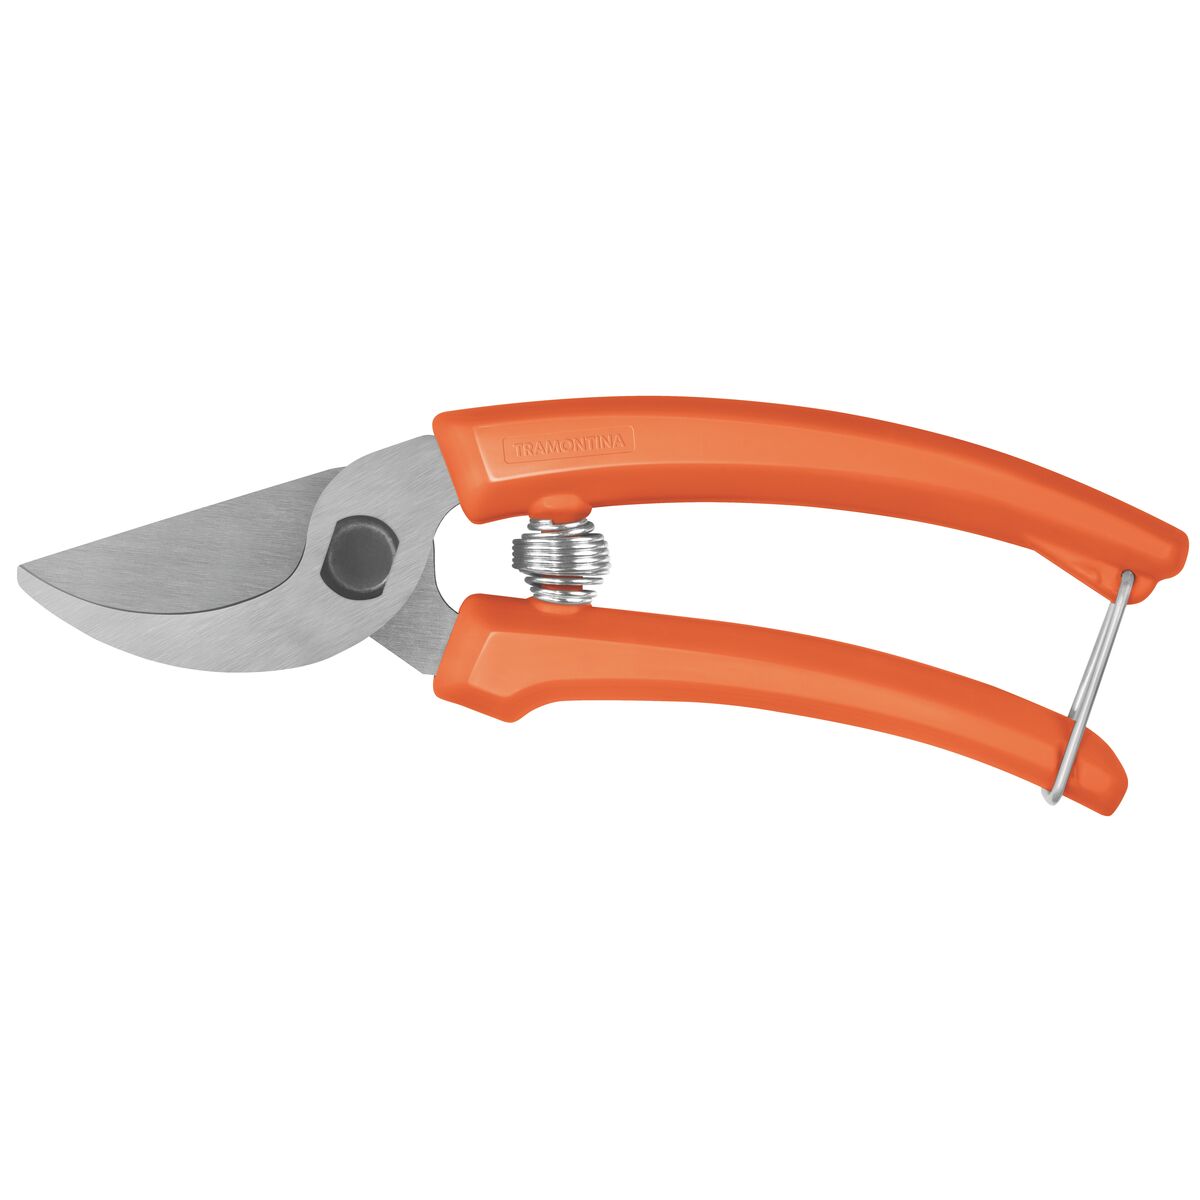 Tramontina's pruners with metal blades and plastic handles